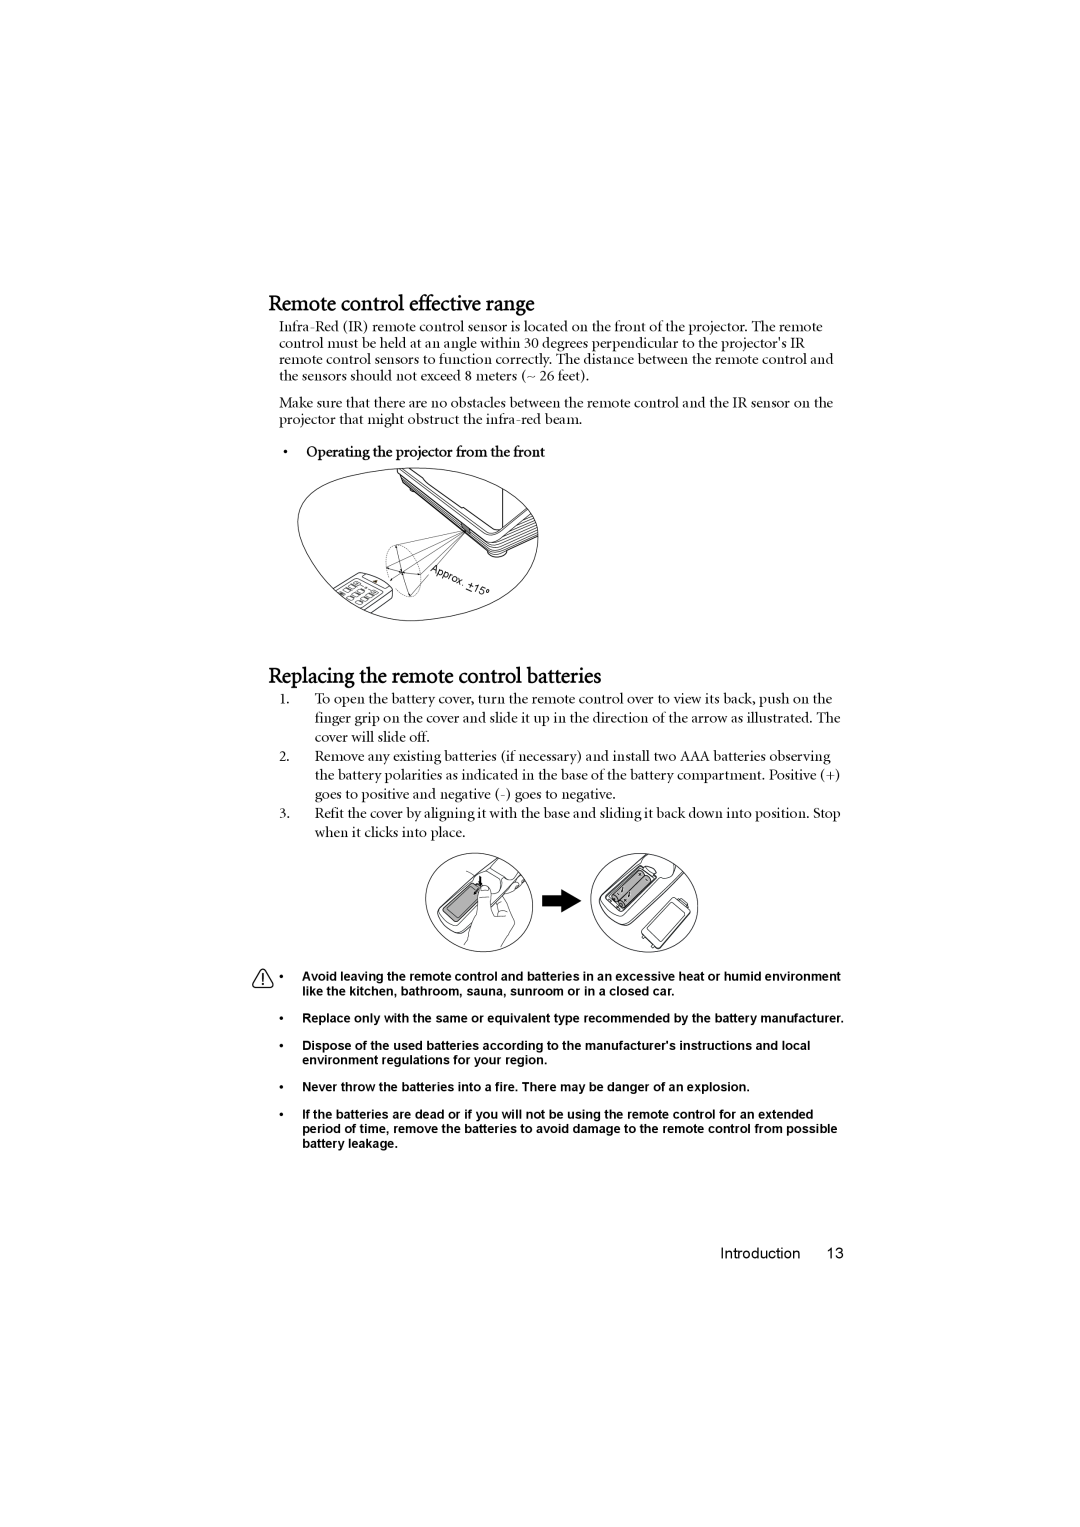 BenQ MX880UST user manual Remote control effective range, Replacing the remote control batteries 